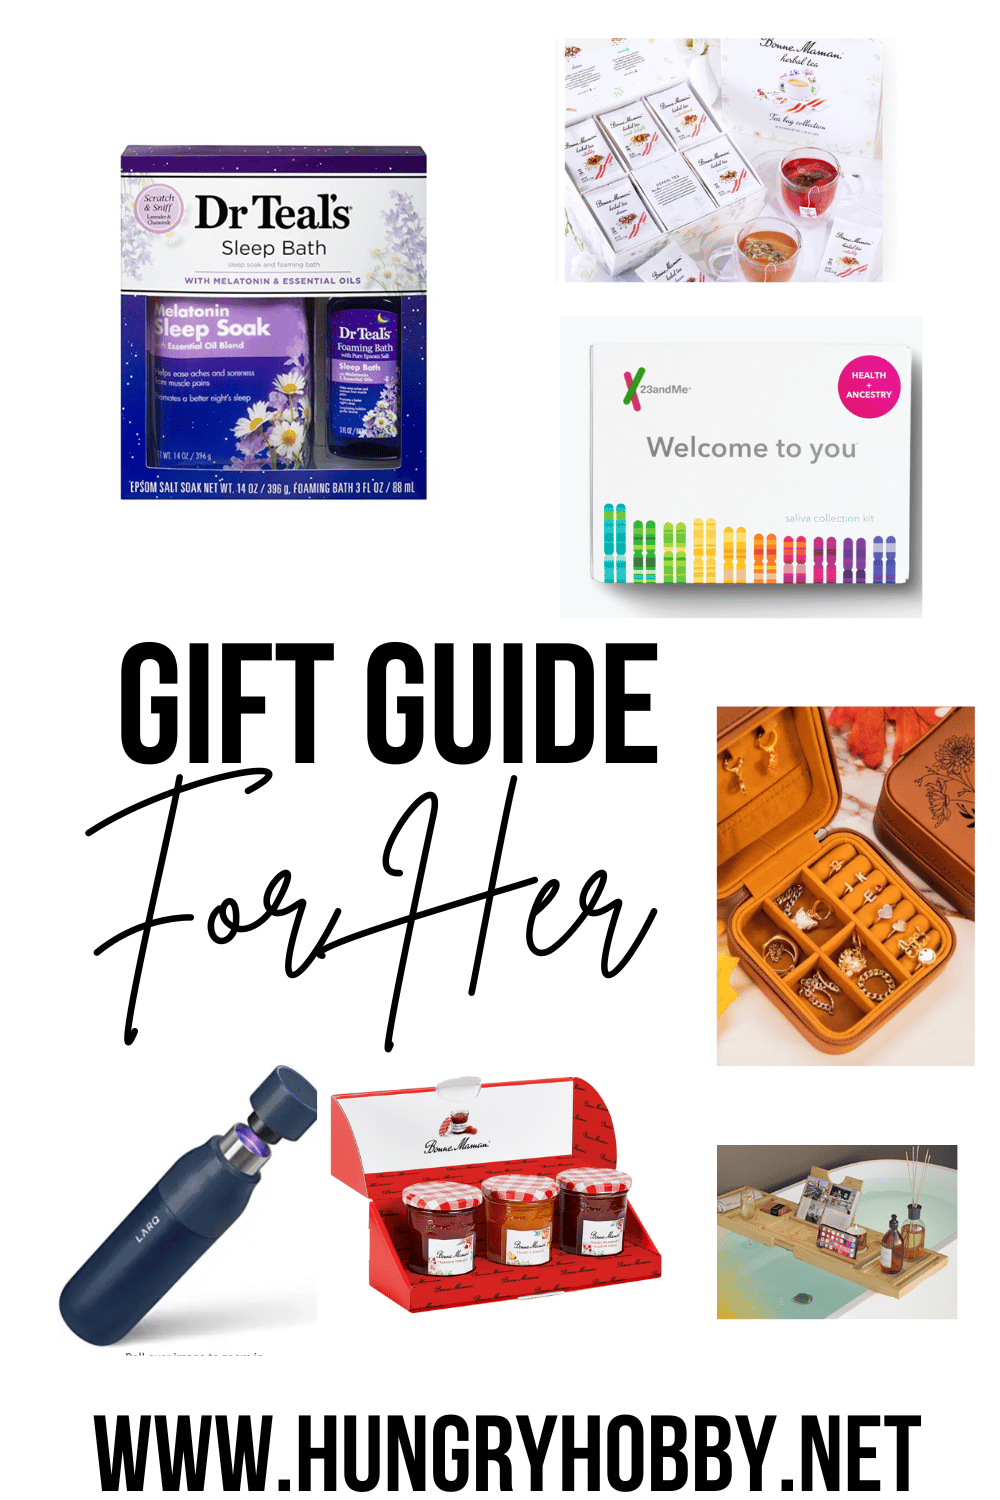 https://hungryhobby.net/wp-content/uploads/2021/12/gift-guide-for-her.png